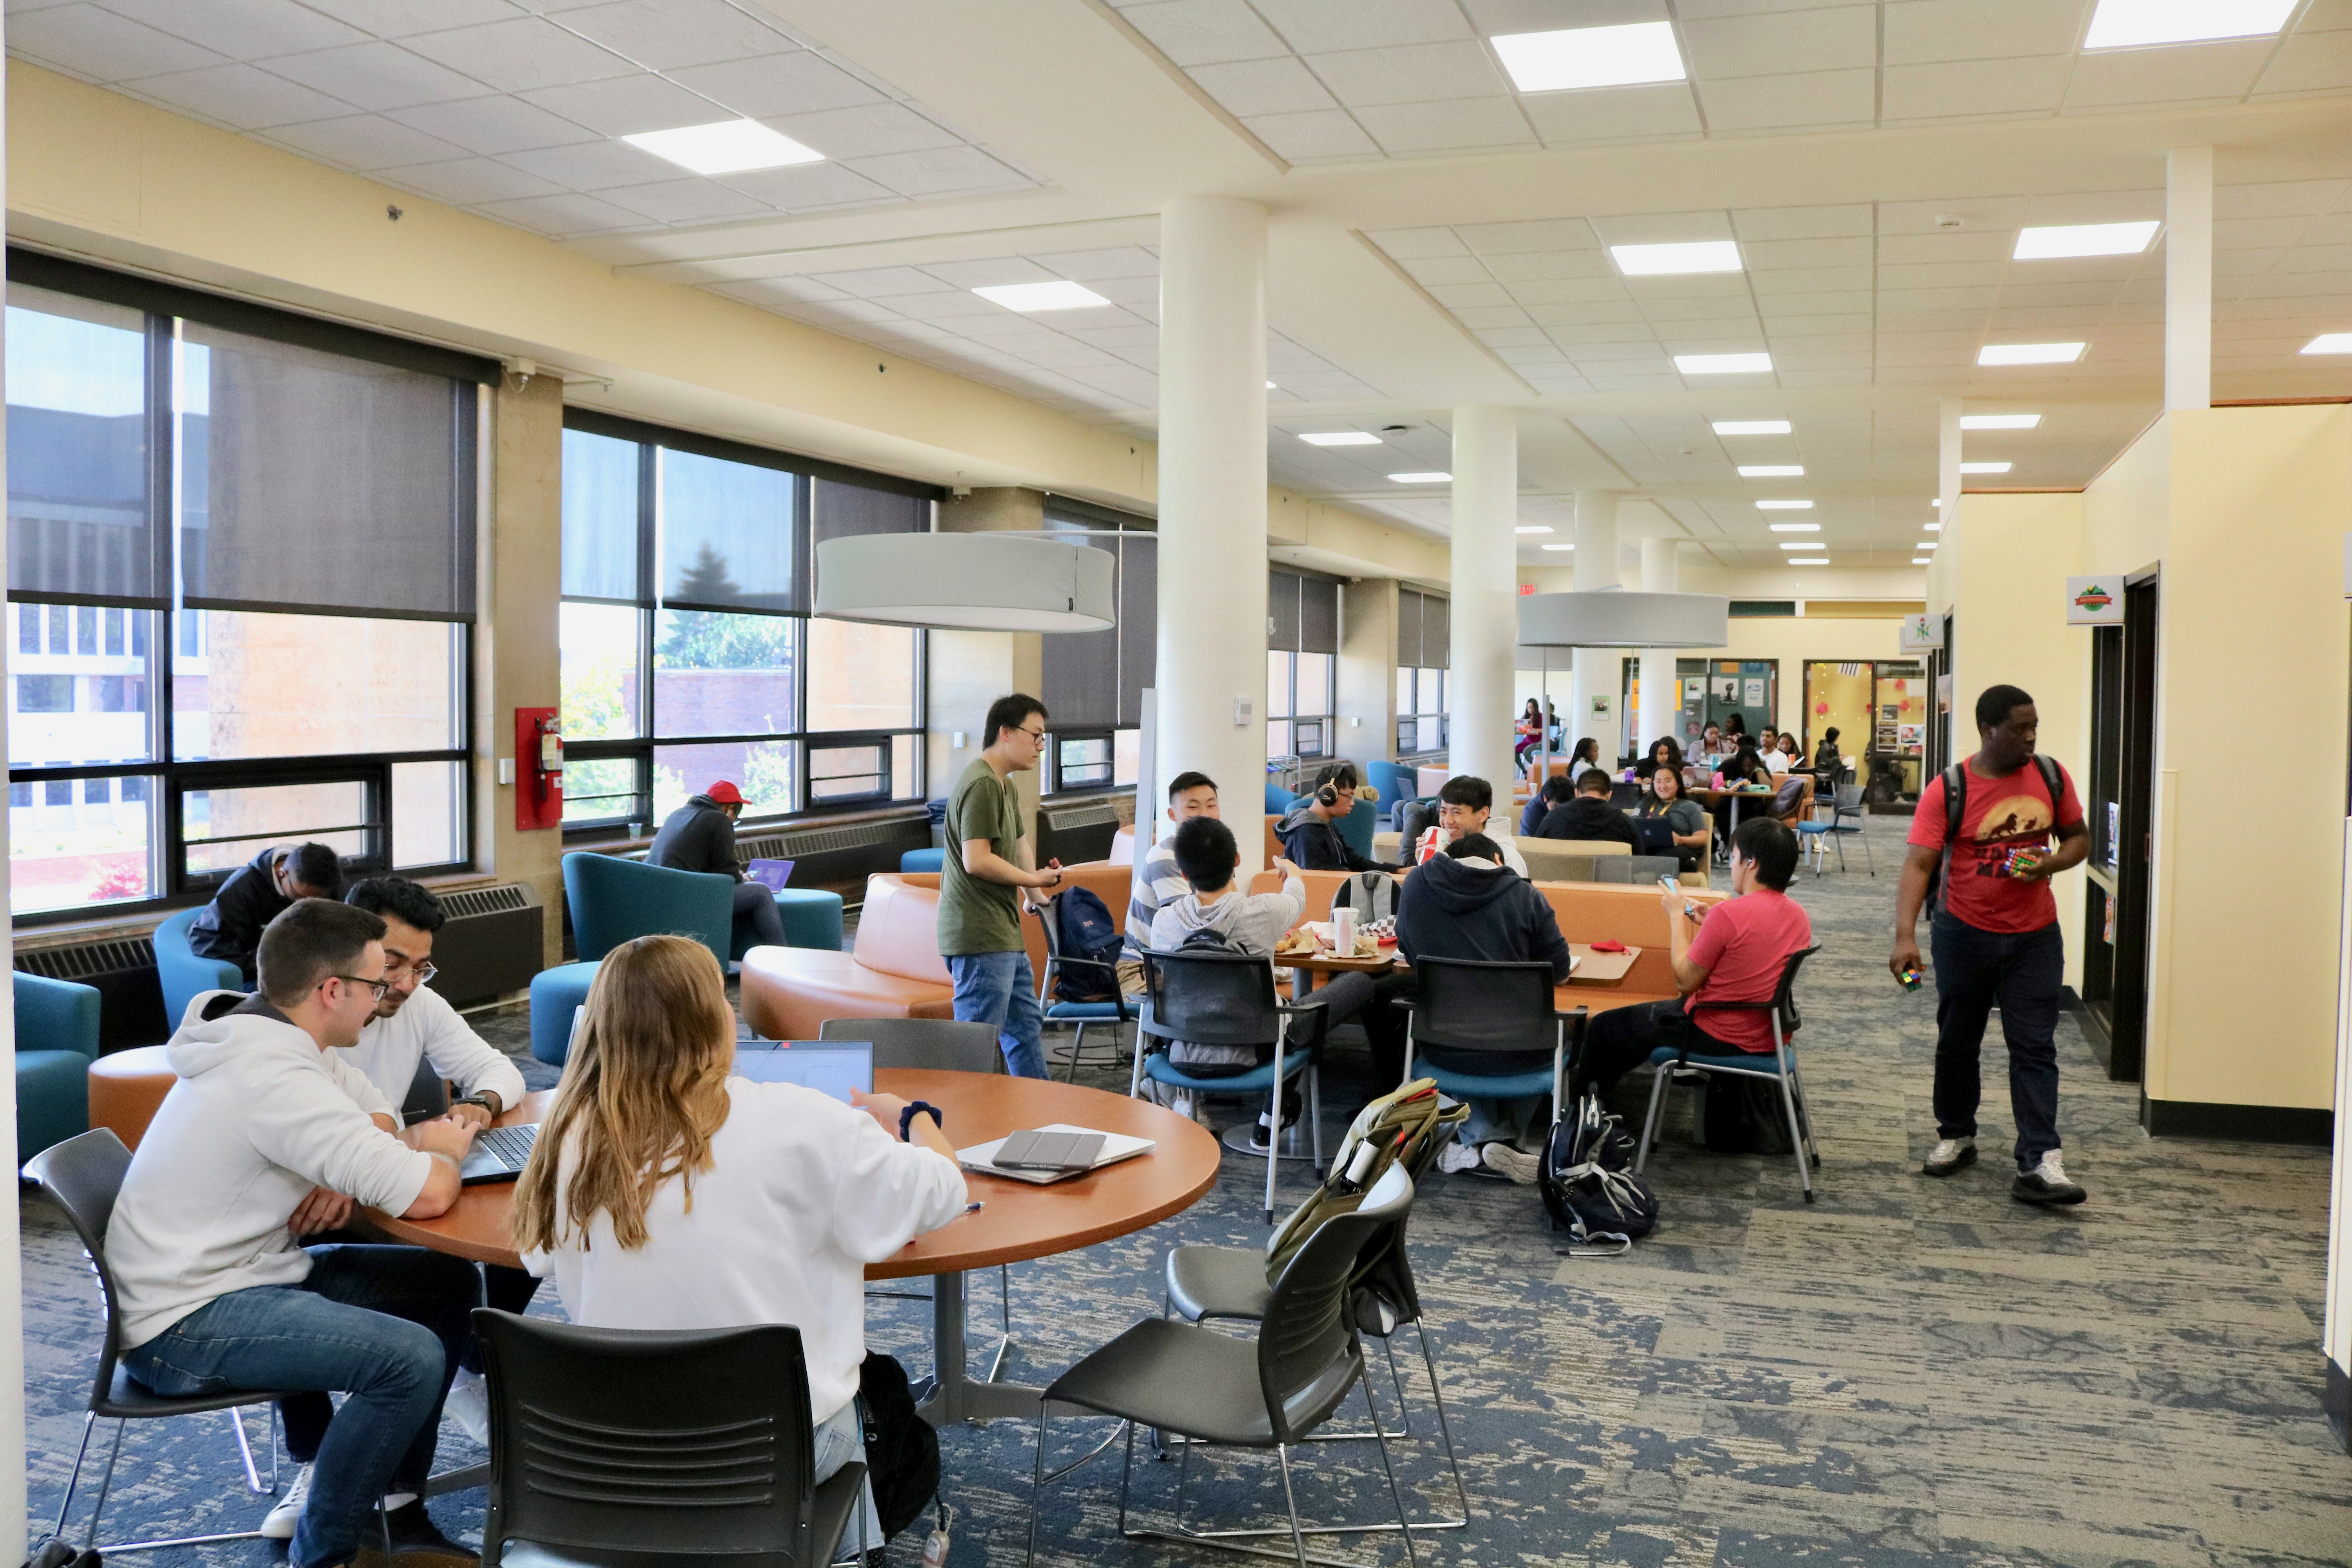 Multicultural Center space with students